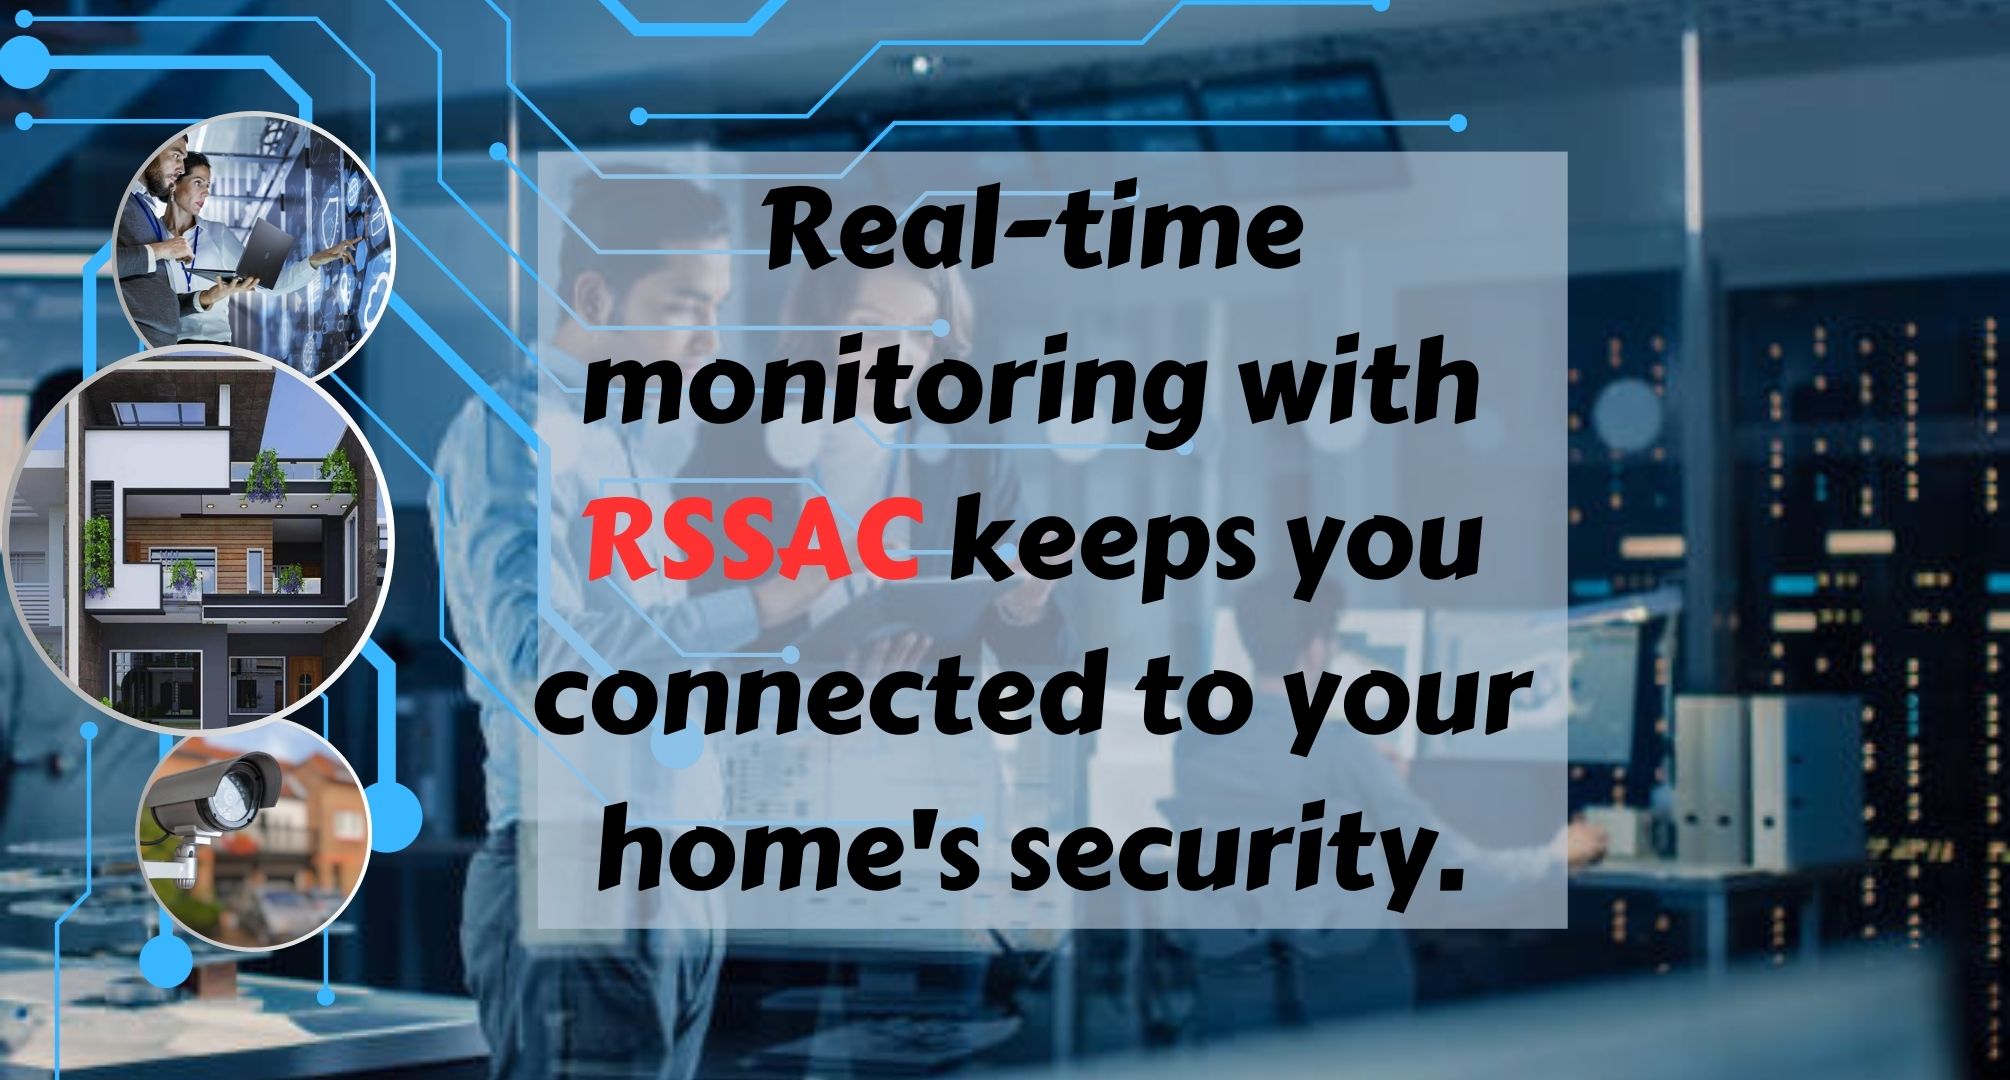 Enhancing Home Safety The Advantages of Having RSSAC for Home Improvement